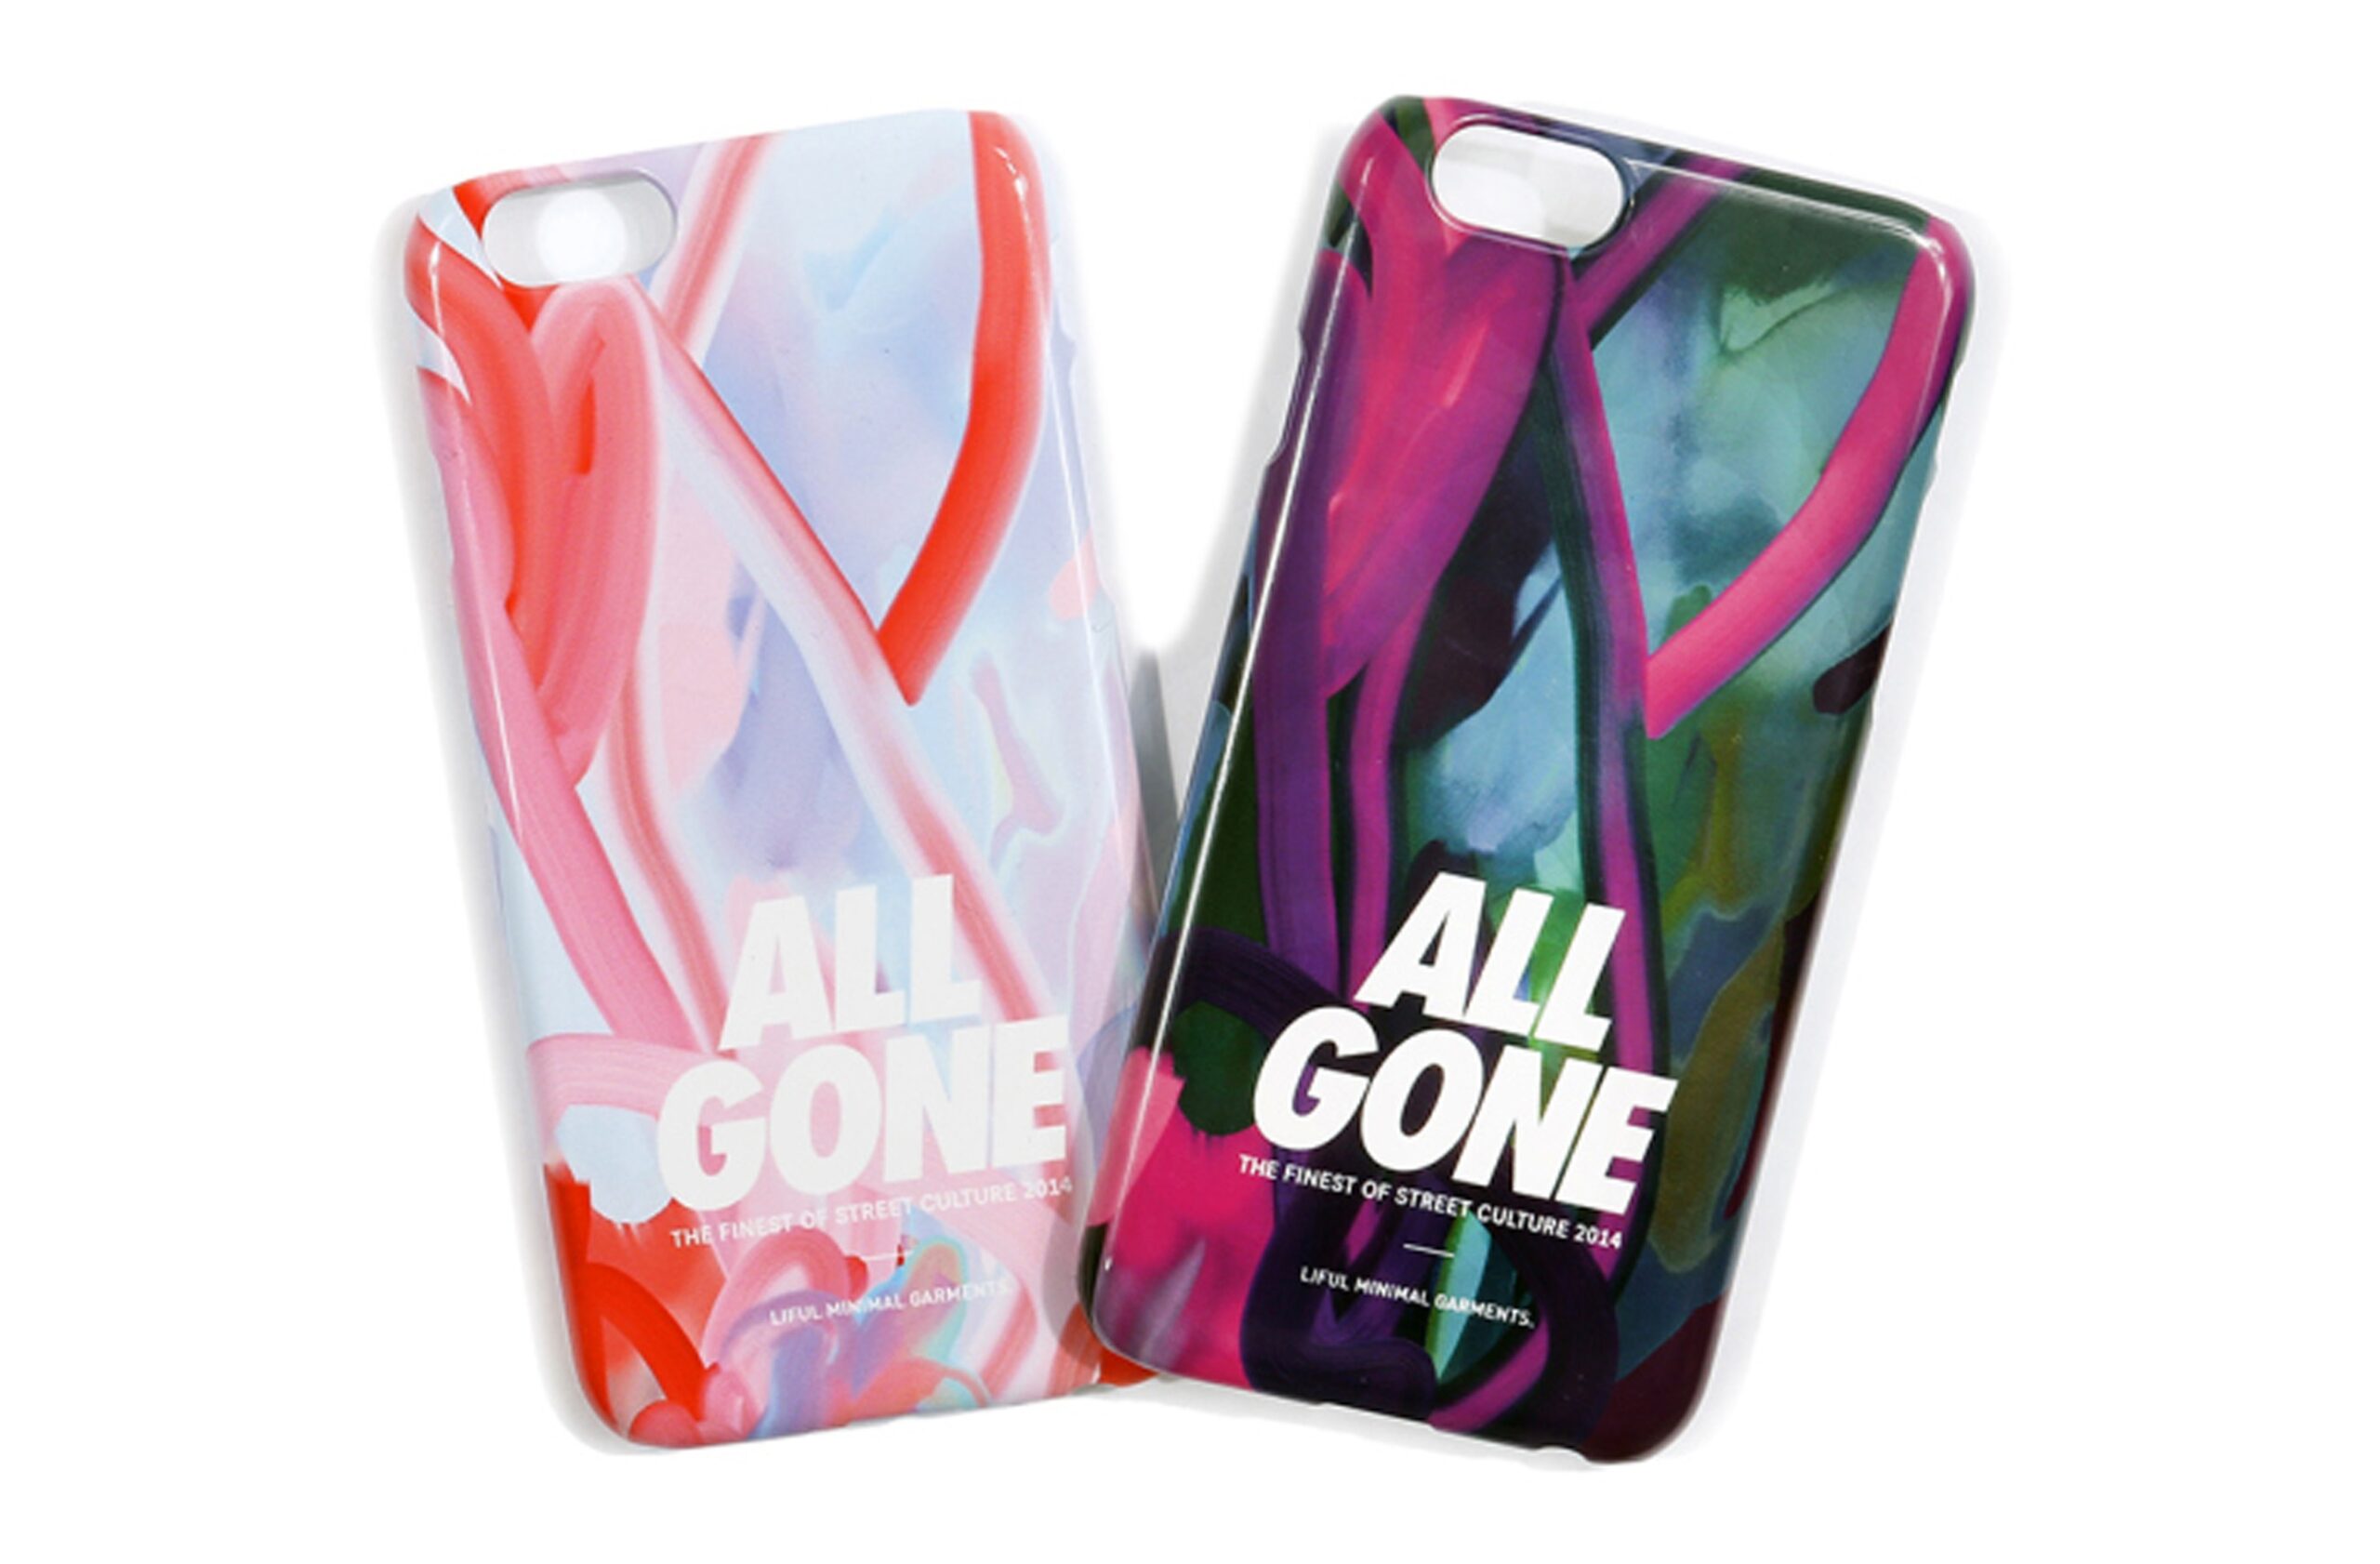 La MJC for LIFUL “All Gone 2015” iPhone 6 手機殼迷幻現身